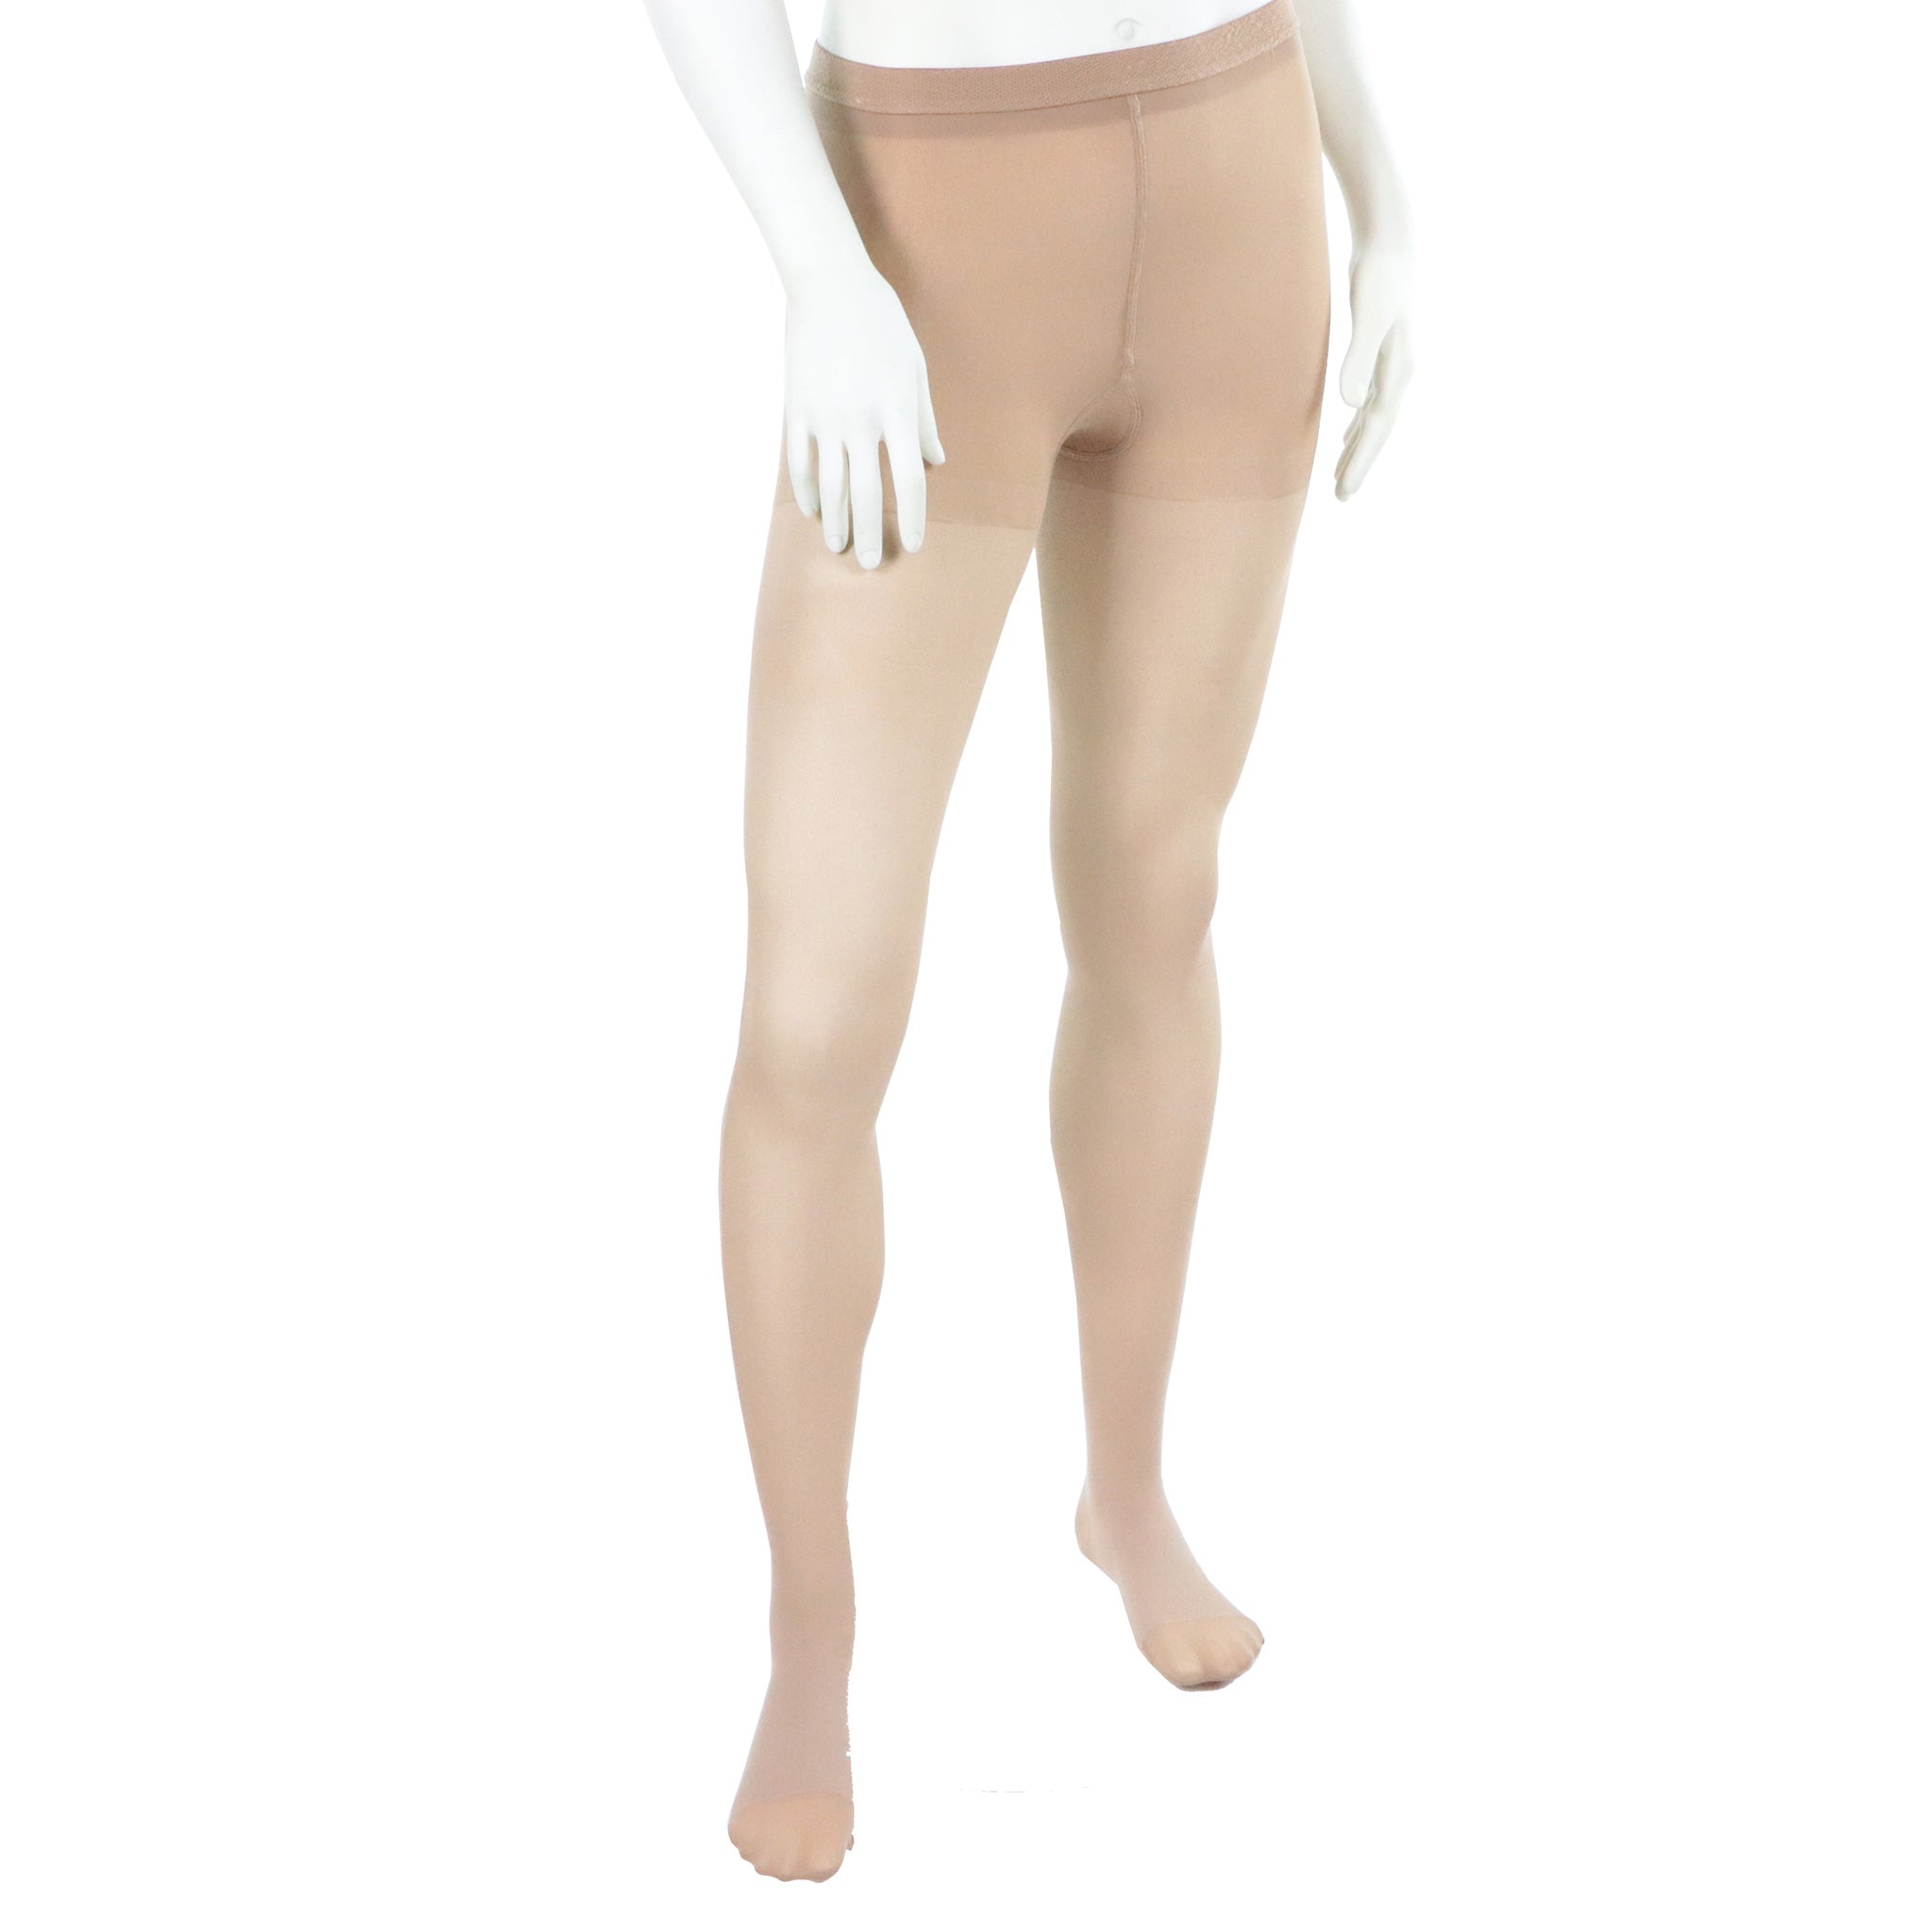 Pantyhose compression stockings 20 30 mmhg beige closed toe Doctor Brace front view